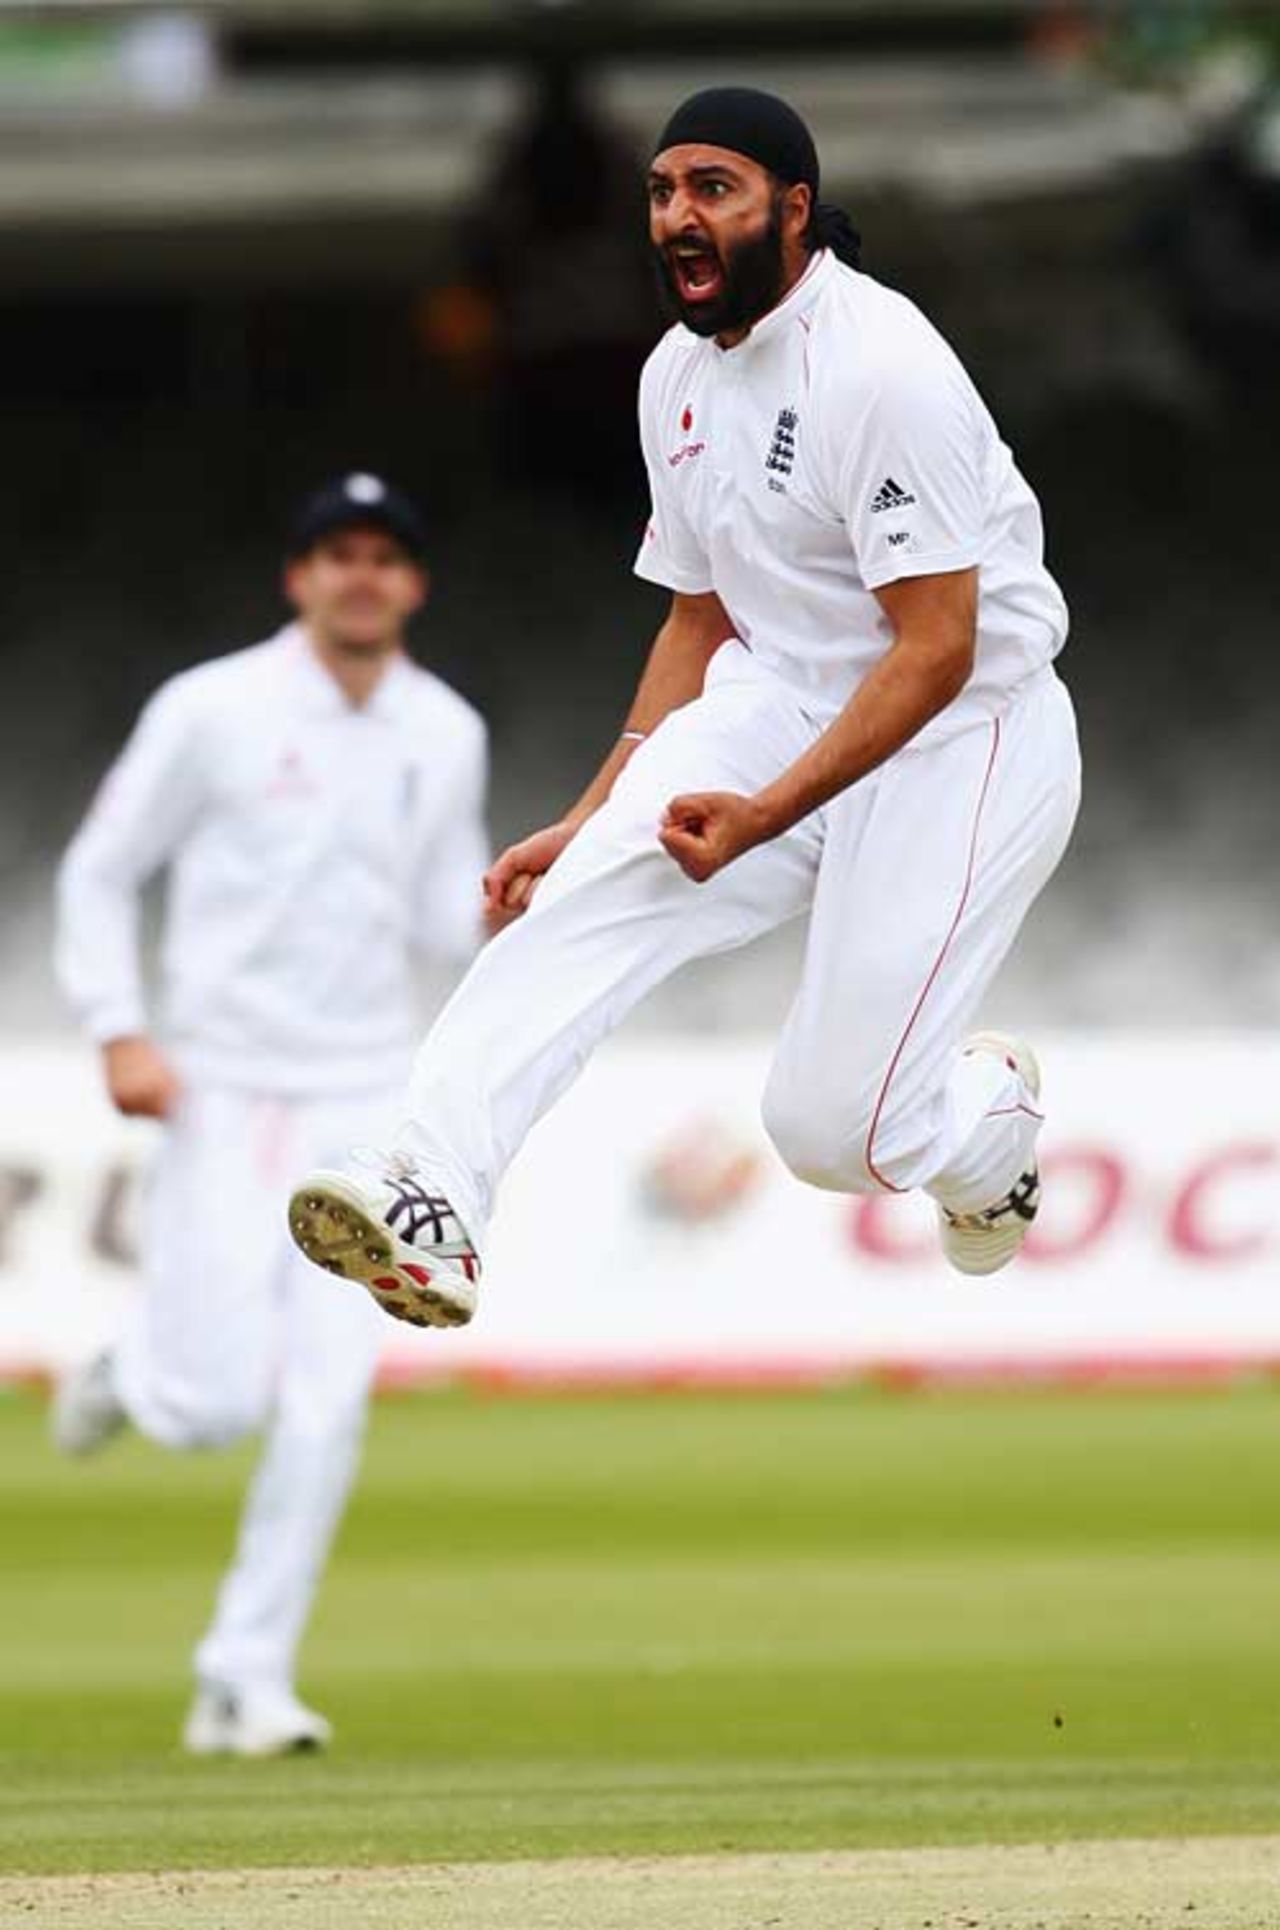 Monty Panesar shows his joy at removing Ross Taylor, England v New Zealand, 1st Test, Lord's, May 19, 2008